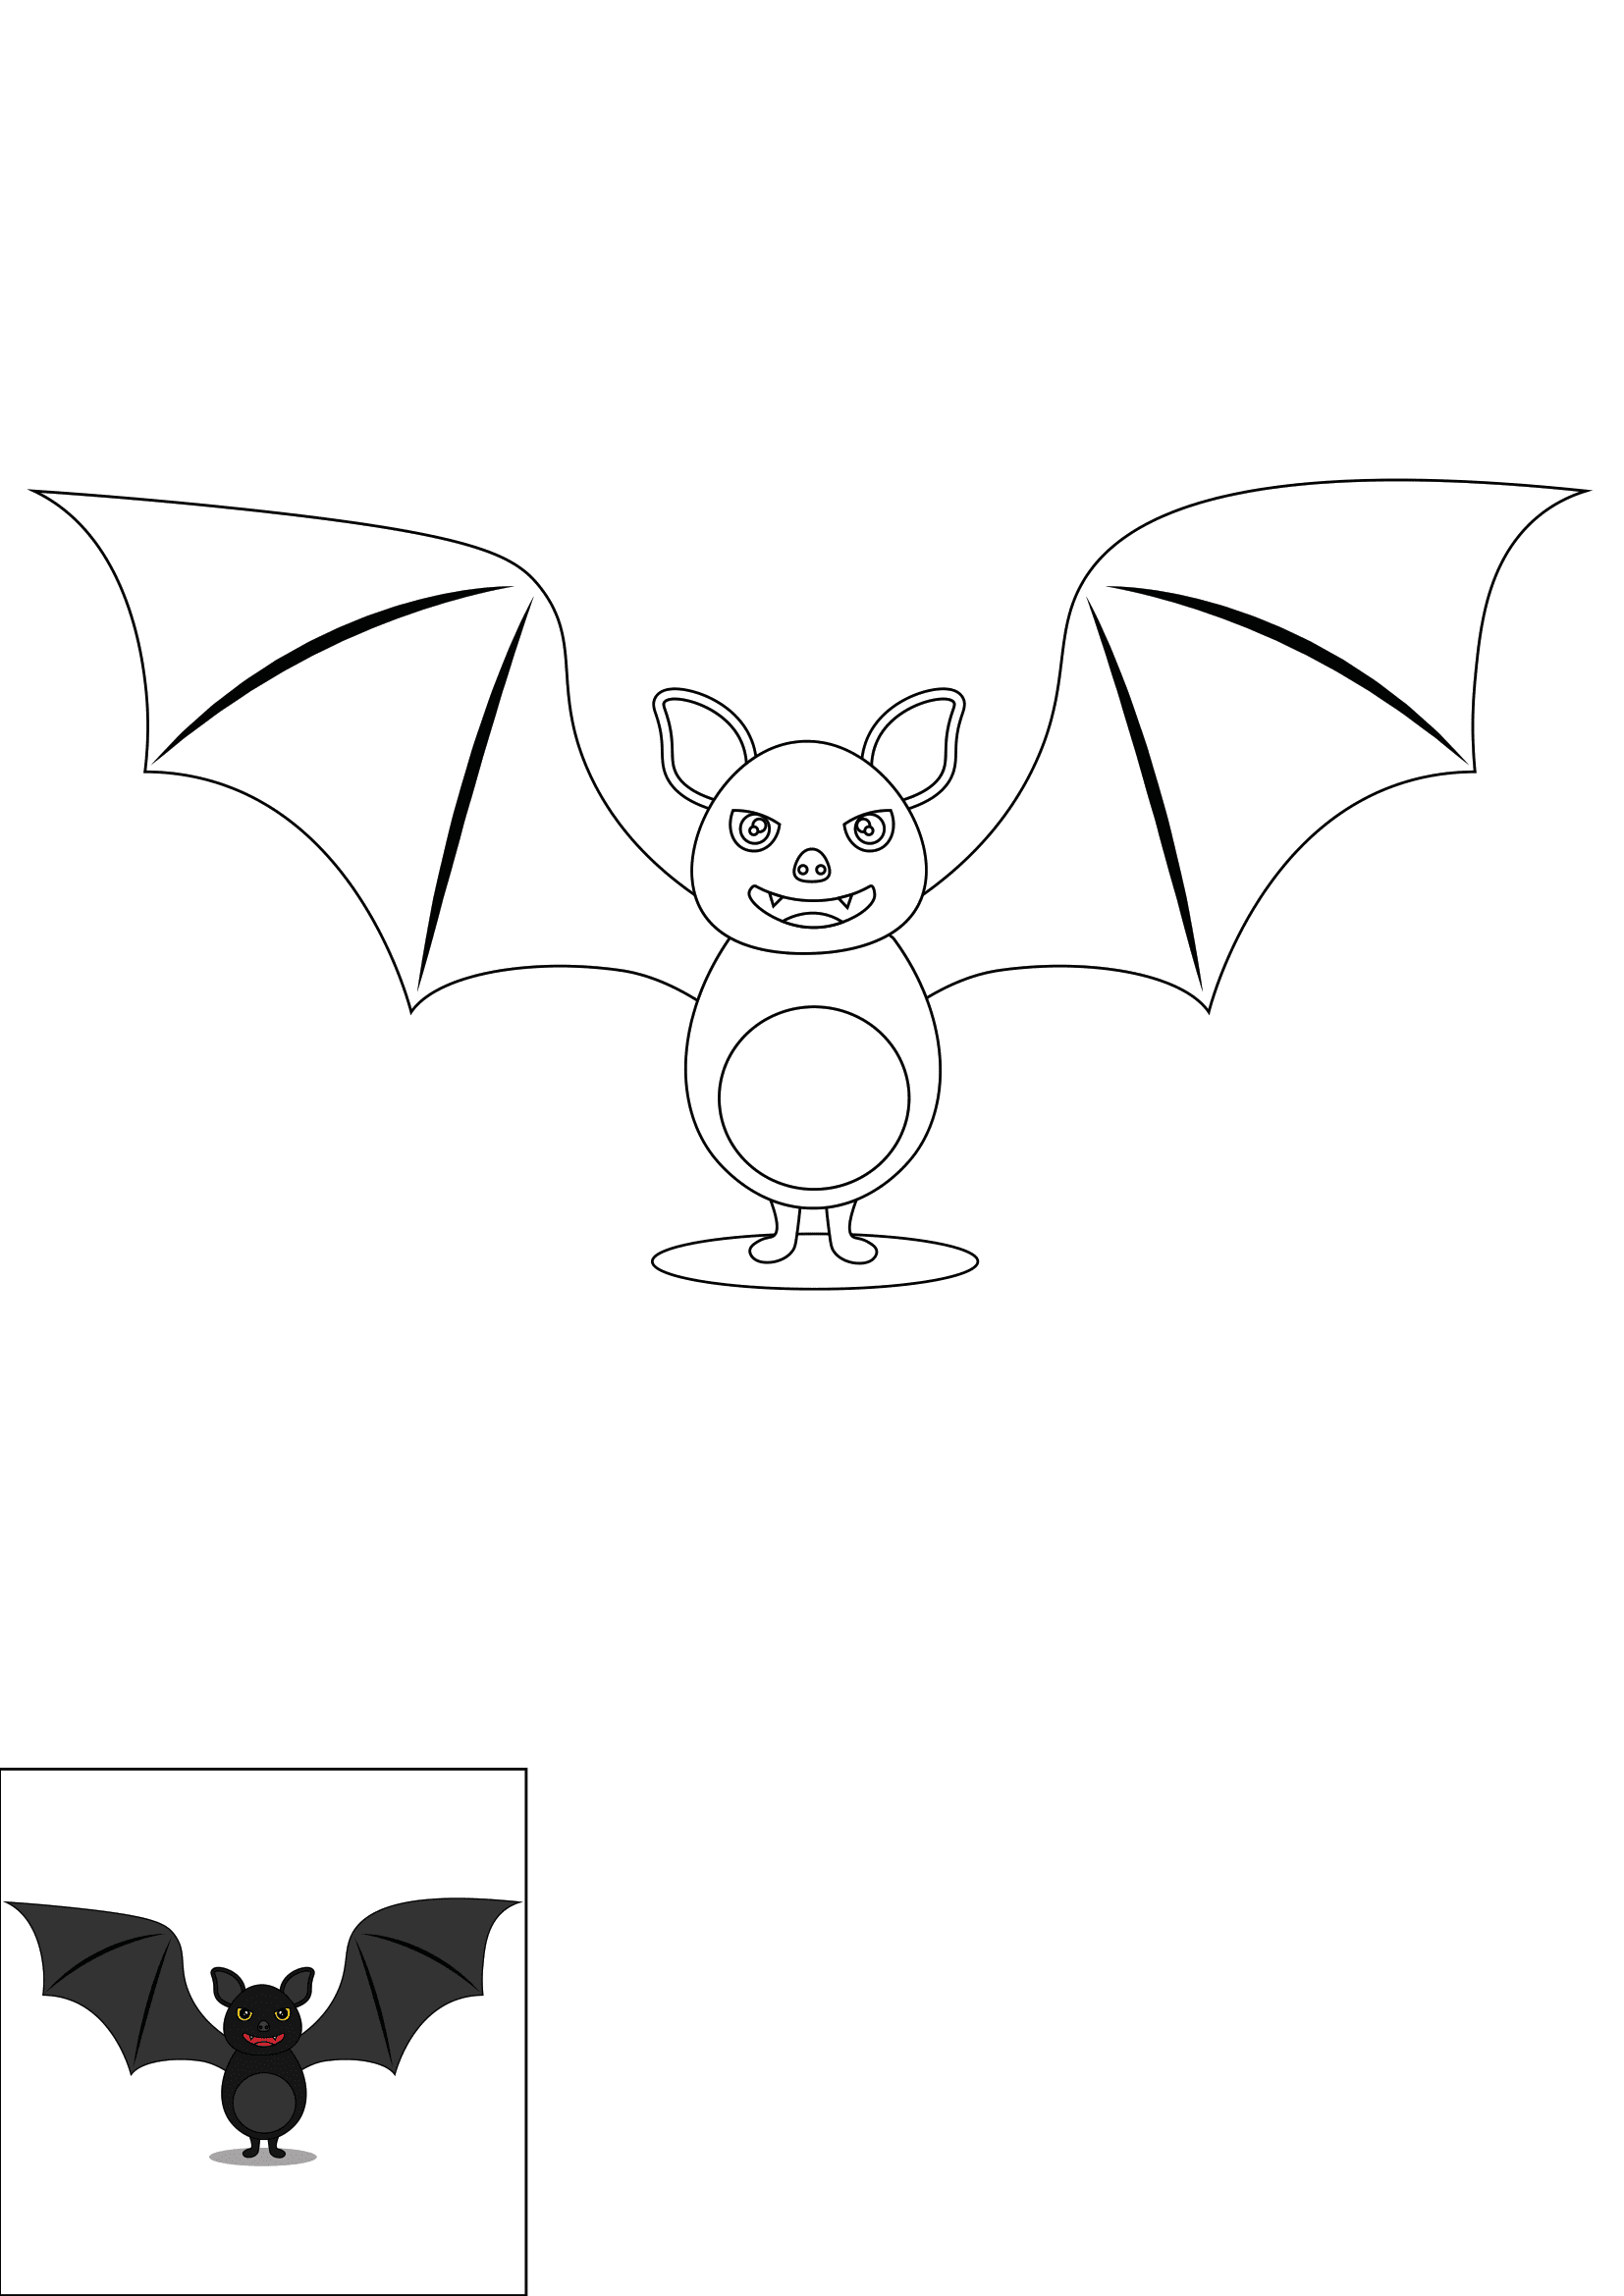 How to Draw A Bat Step by Step Printable Color